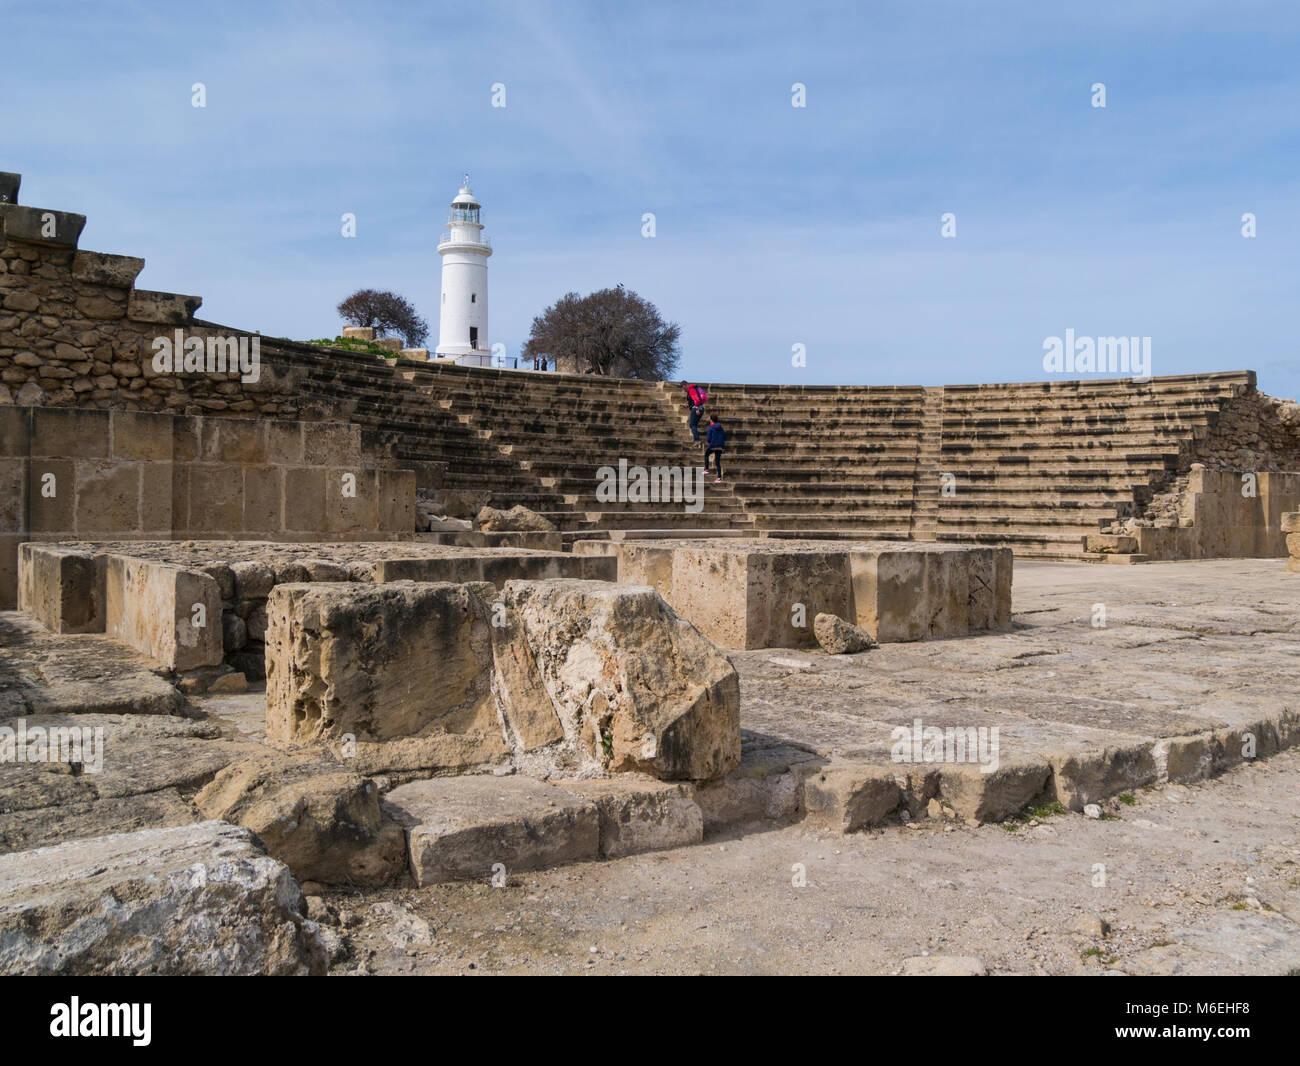 Remains of Odeon Theatre seating 1200 people Nea Pafos Archaelogical Park Kato Pafos Phaphos Southern Cyprus now used for outdoor entertainment Stock Photo